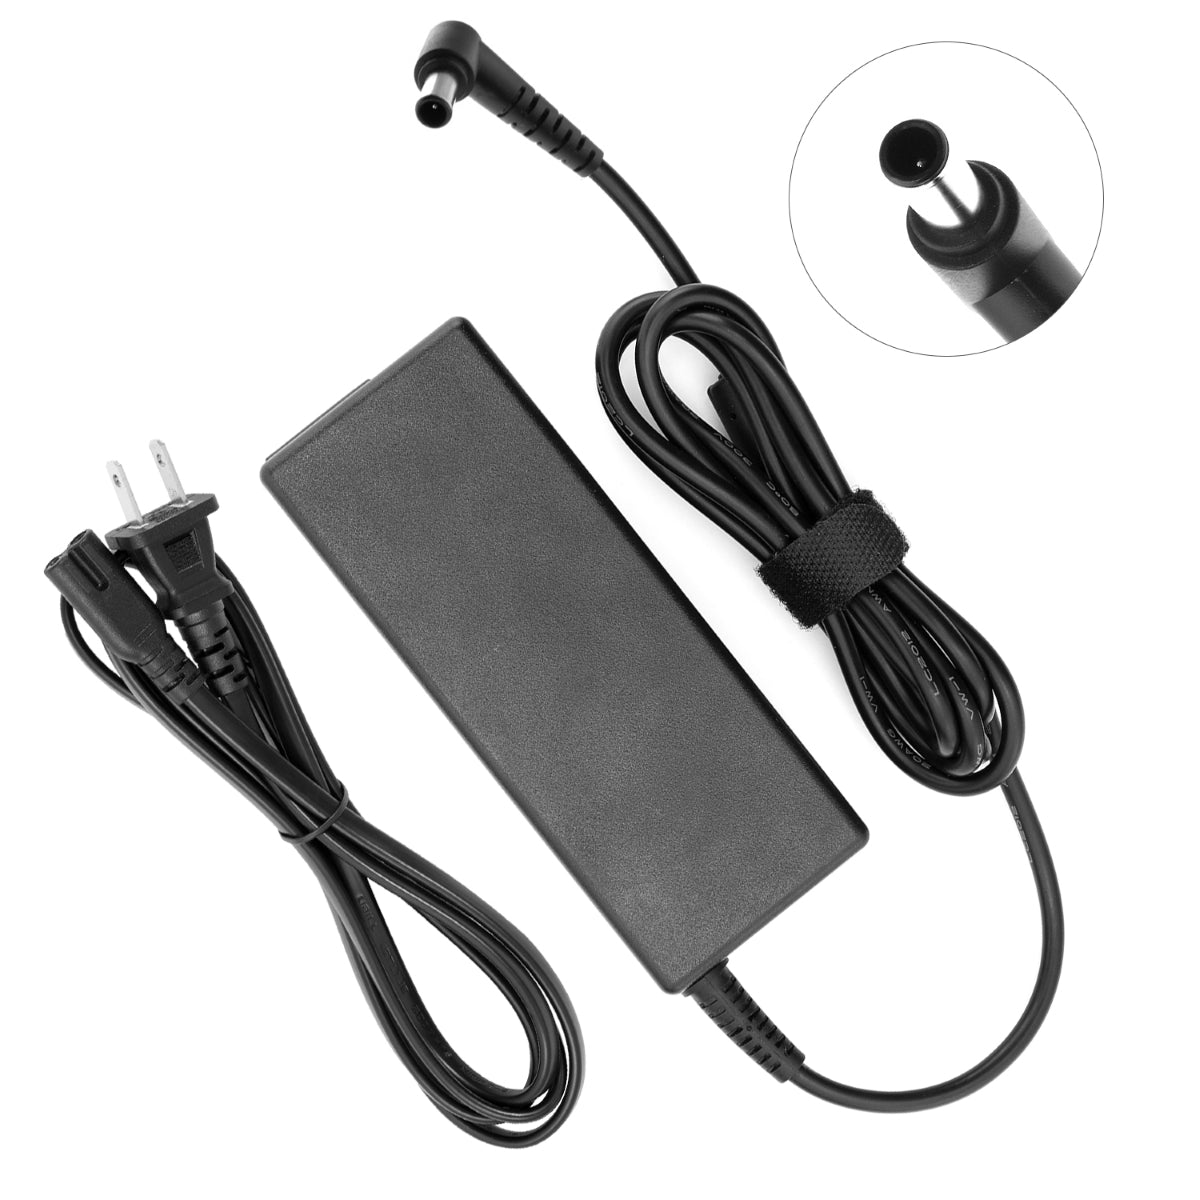 Power Adapter for LG 27GN850-B Monitor TV